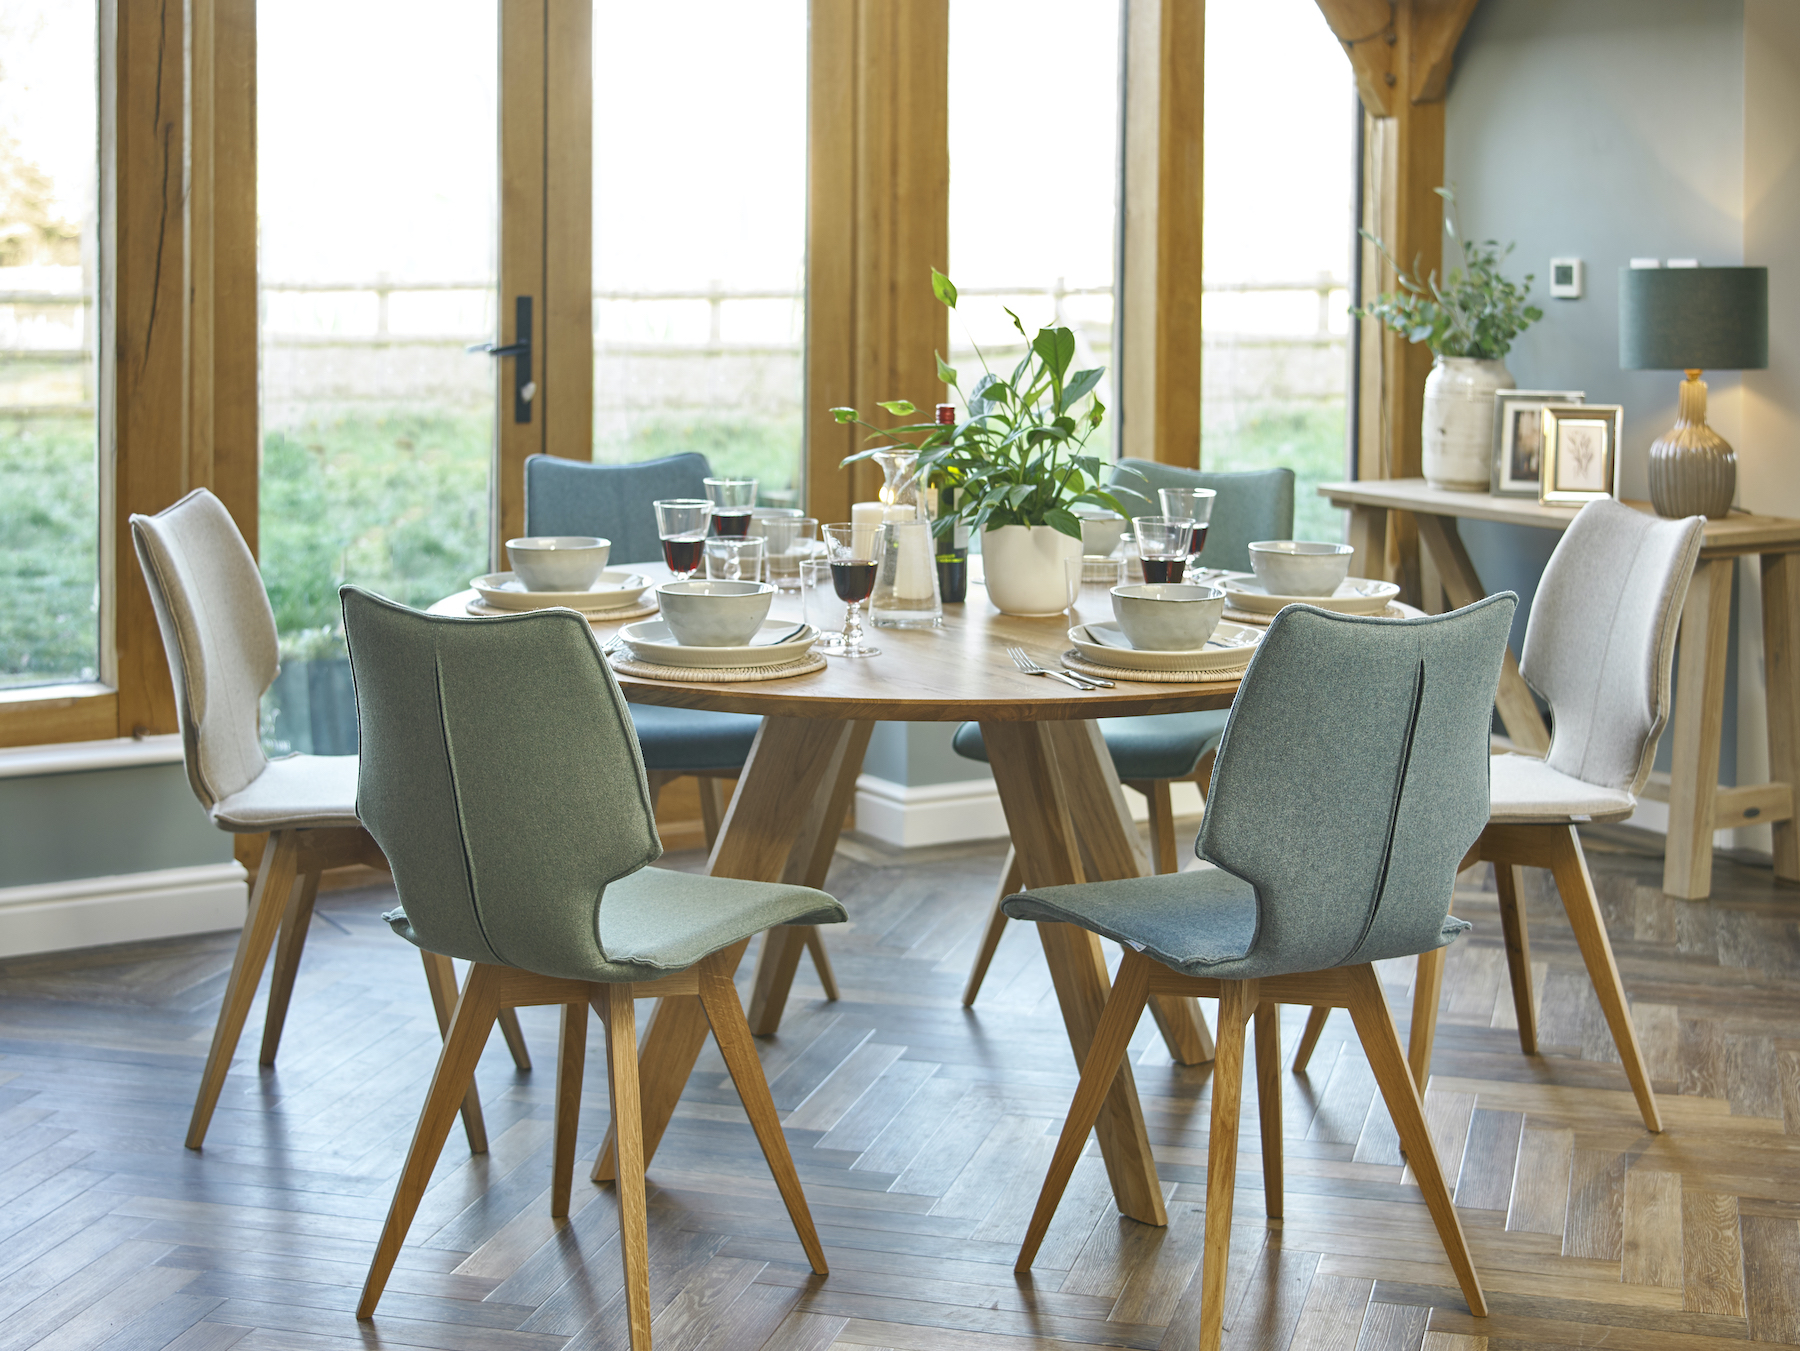 Tresco round dining table and Lulu chairs